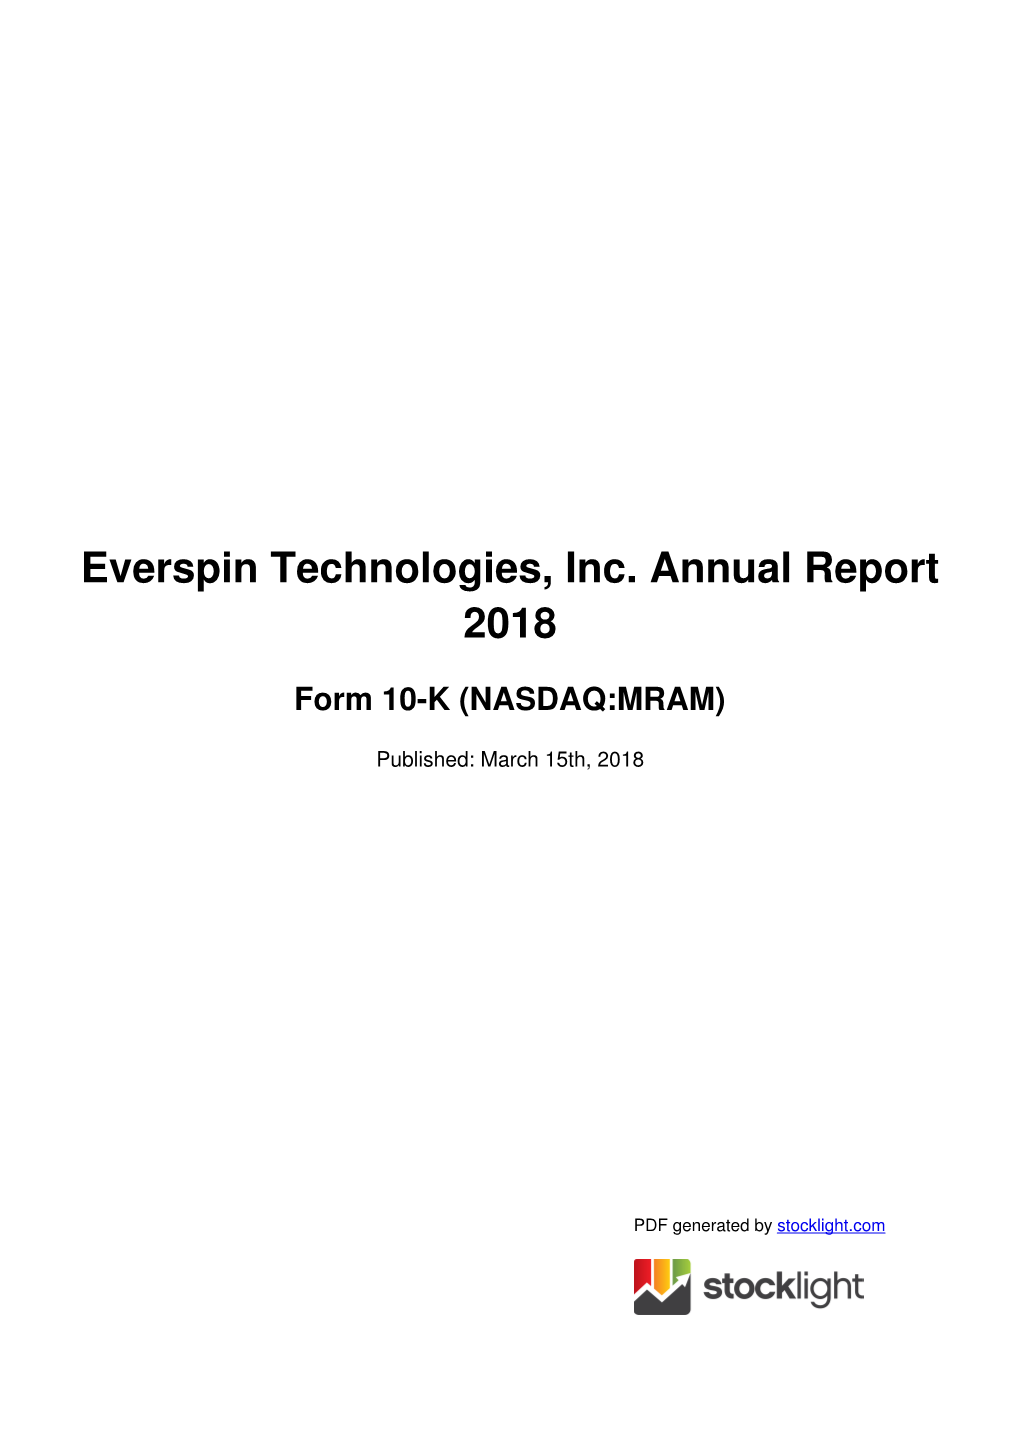 Everspin Technologies, Inc. Annual Report 2018